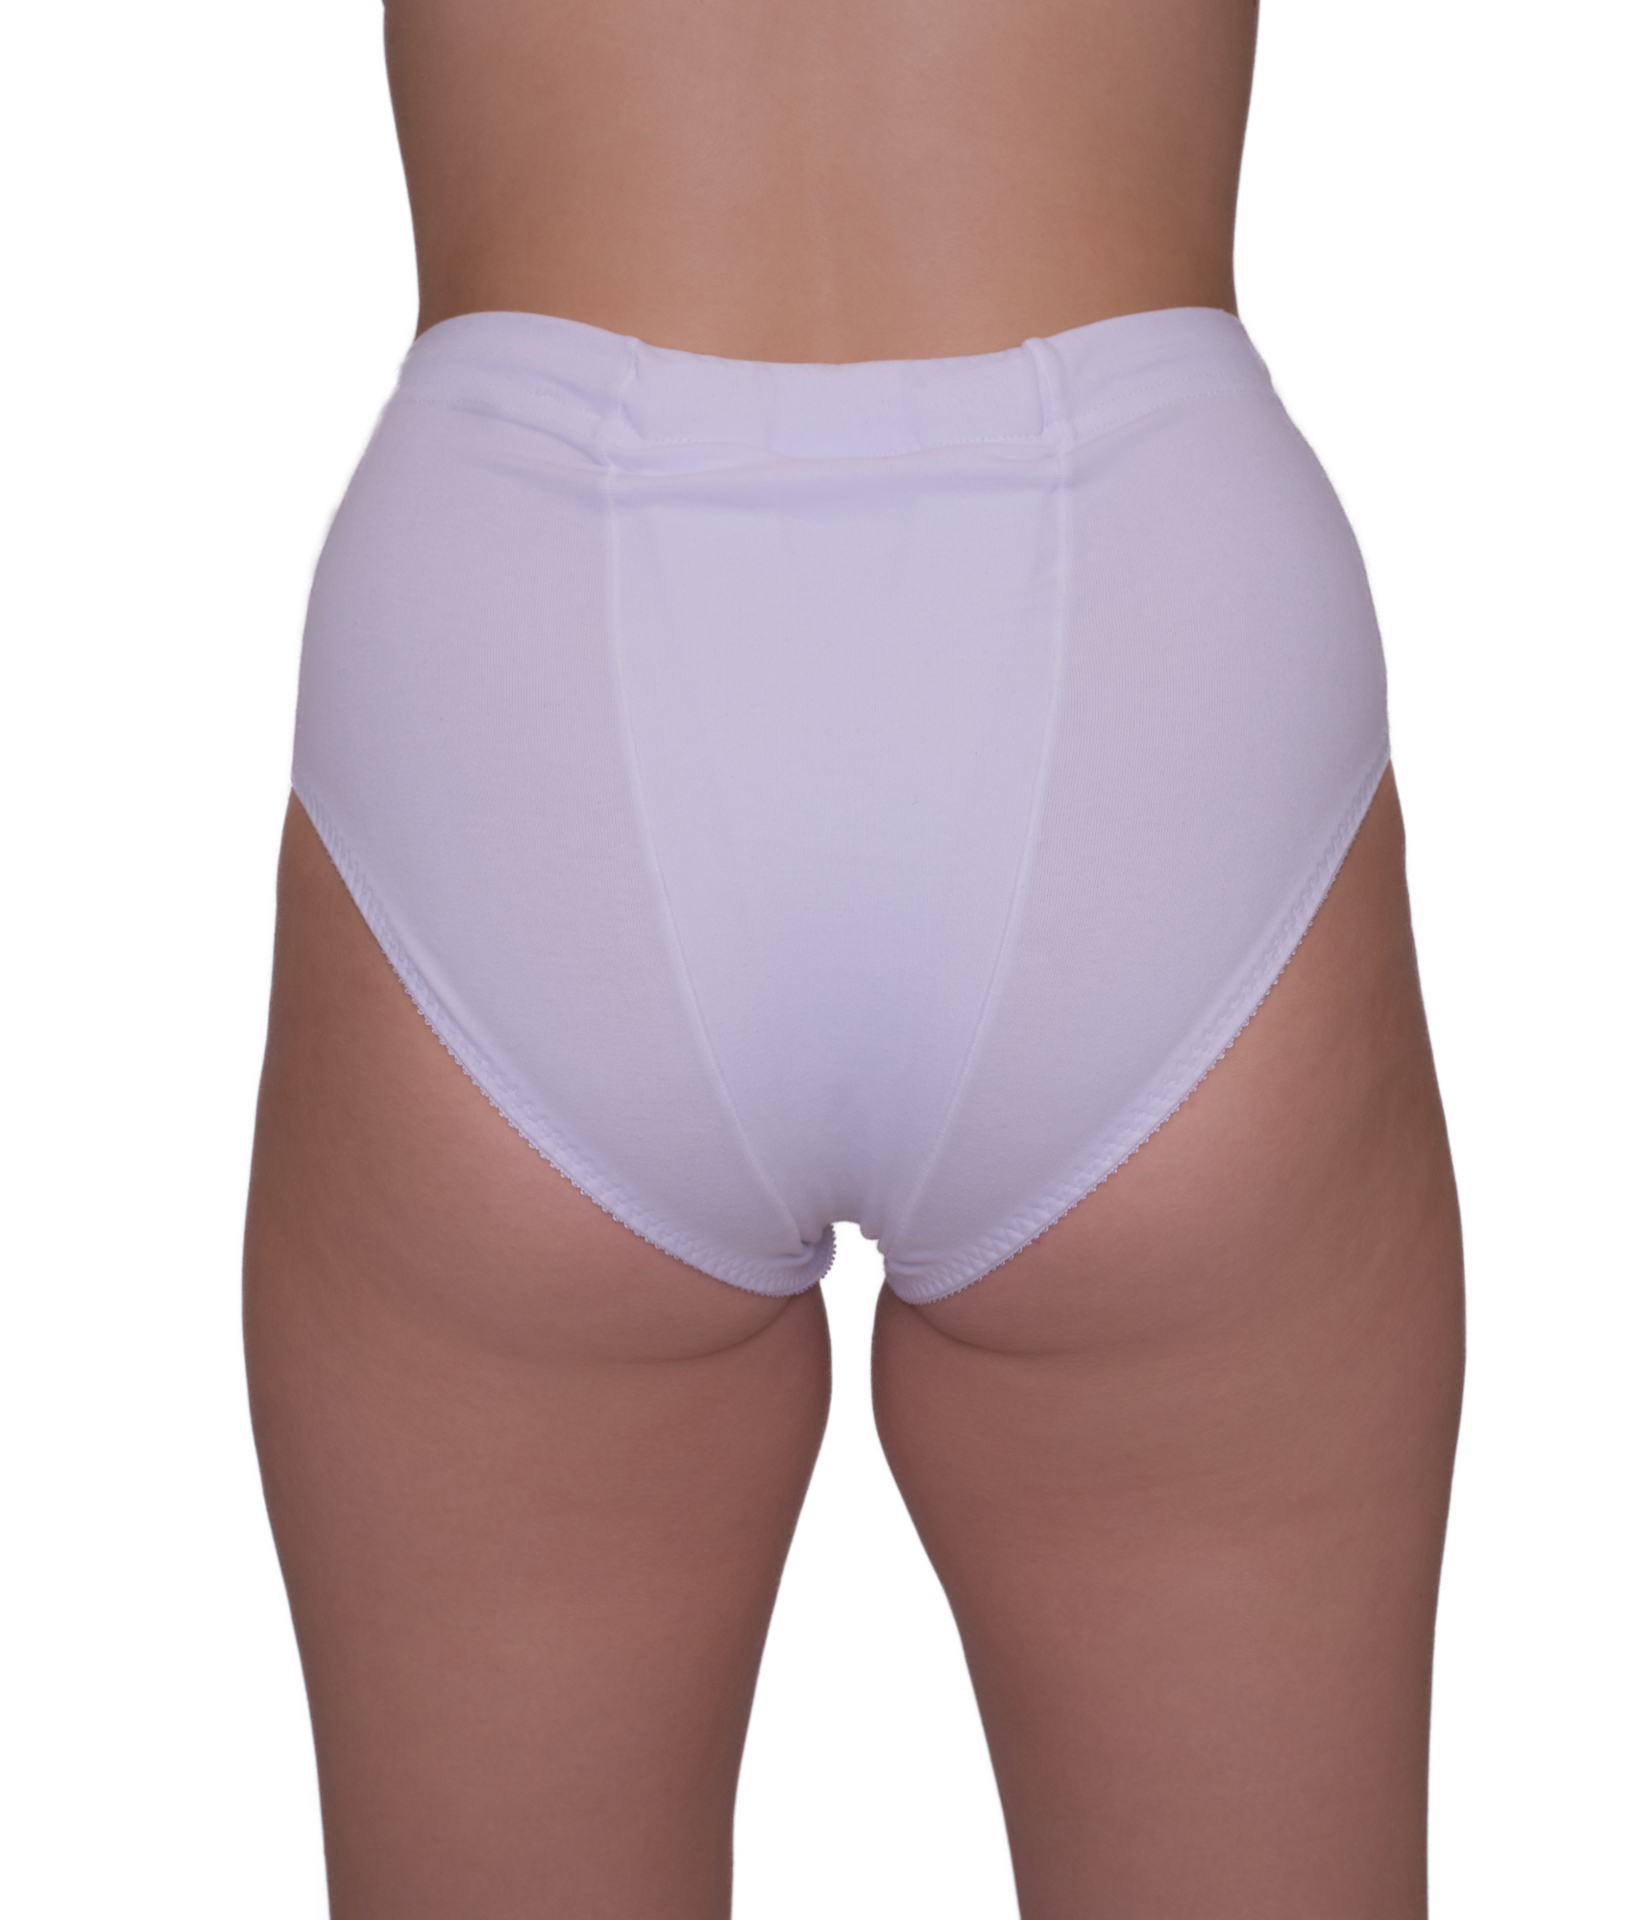 Vulvar Varicosity And Prolapse Support Brief With Groin Compression Bands -  521